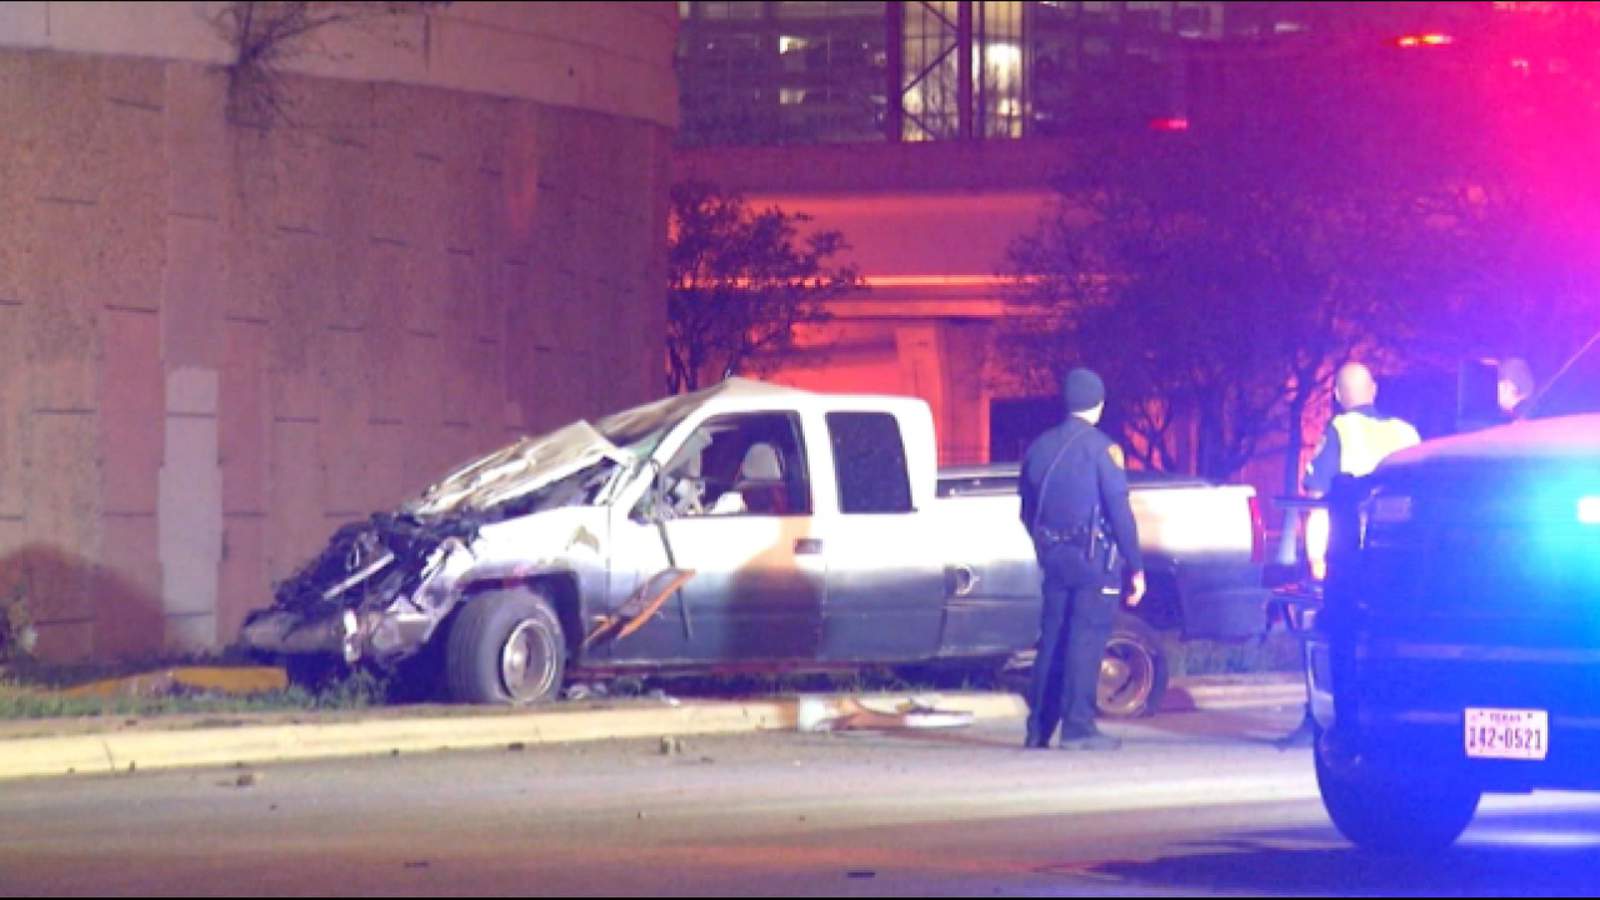 ME’s Office identifies driver killed in vehicle crash downtown